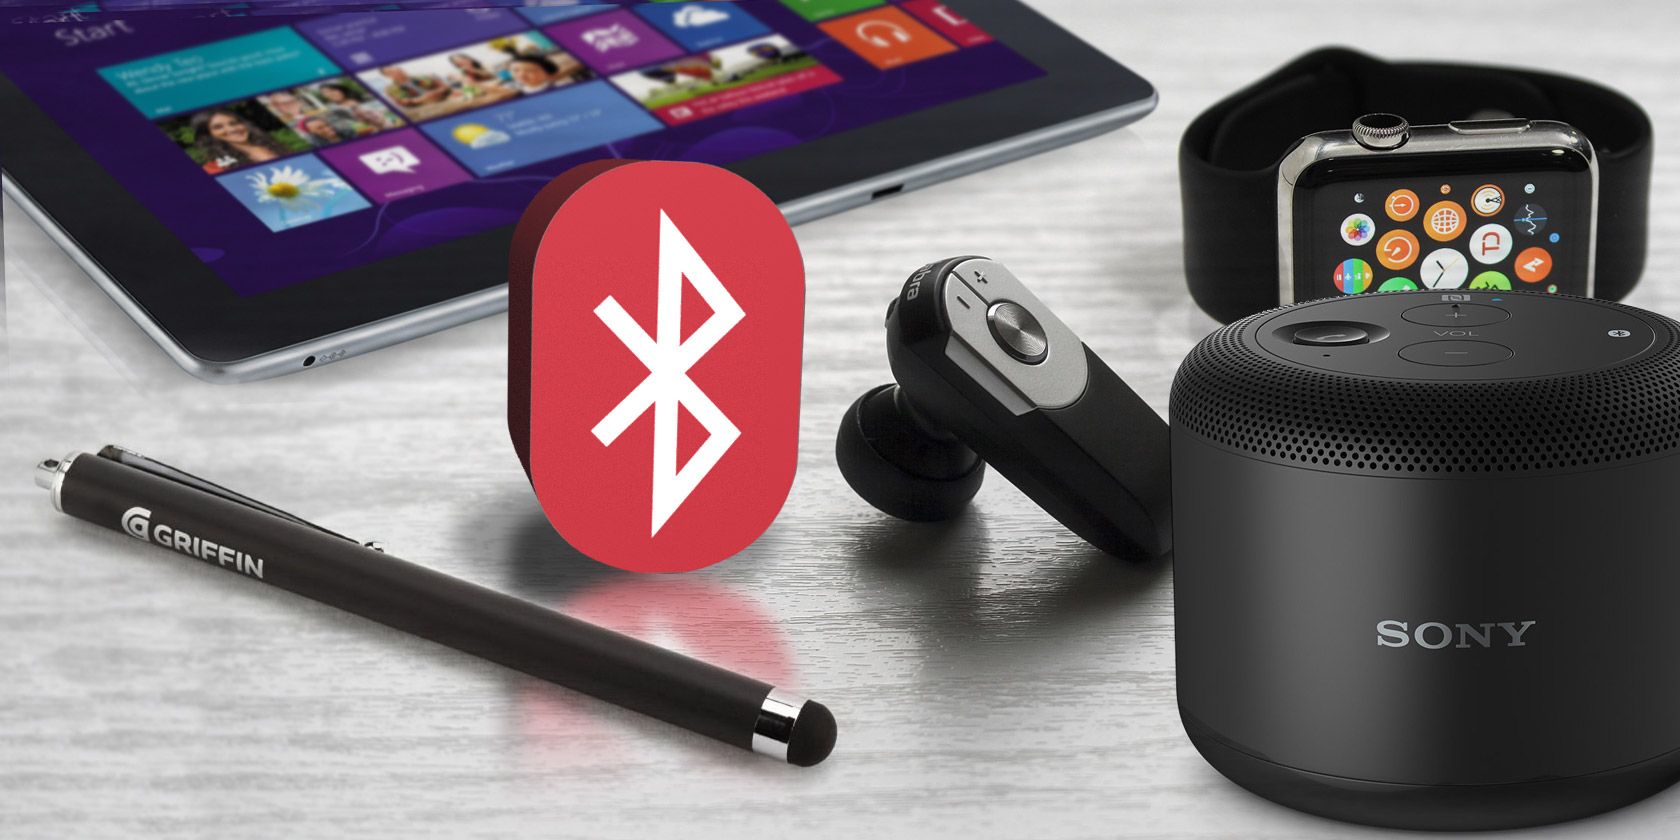 Why Bluetooth Is a Security Risk and What You Can Do About It